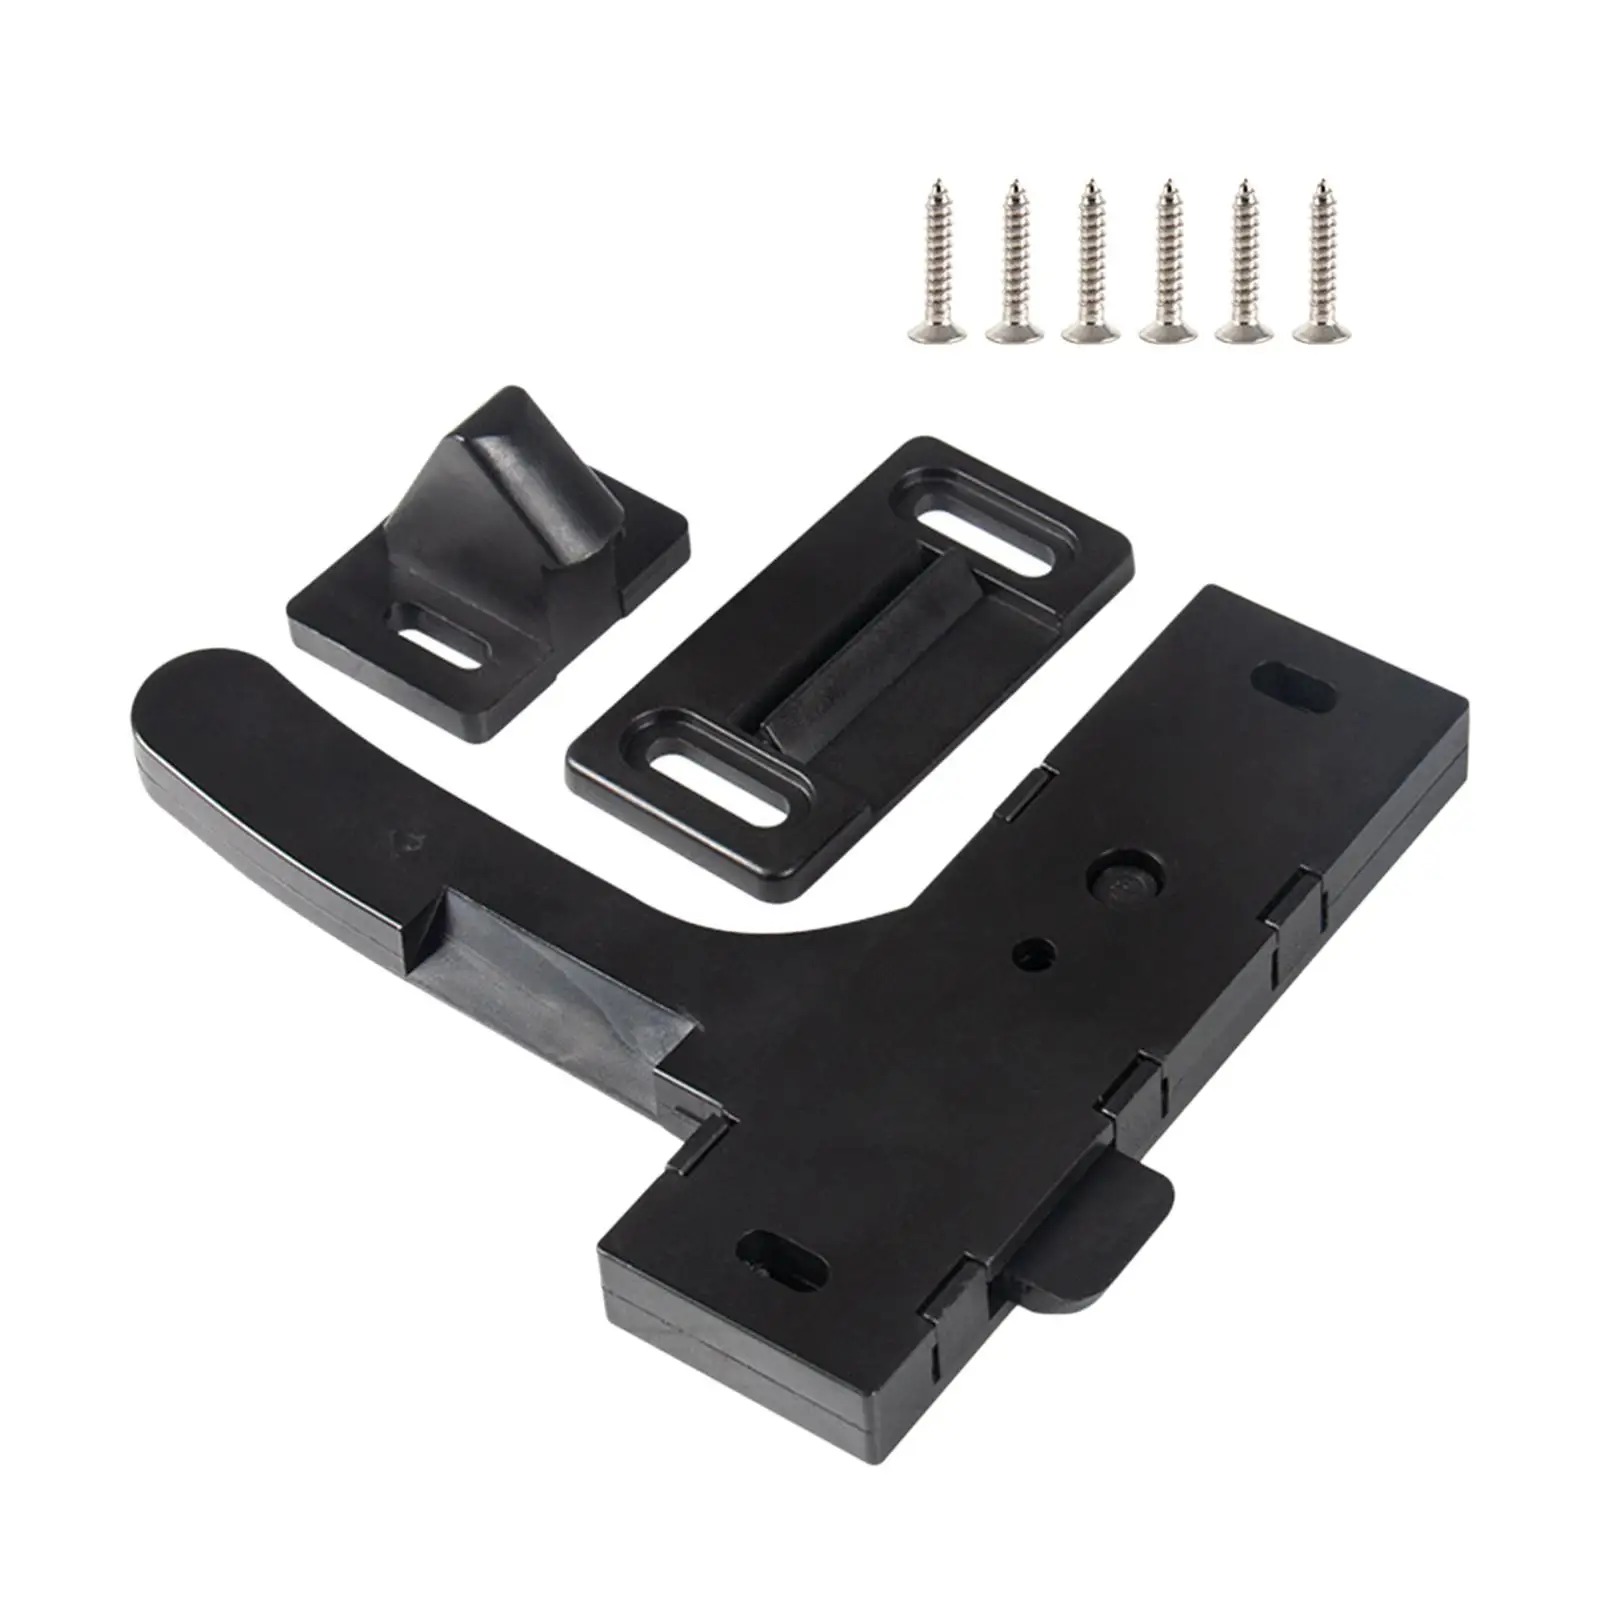 RV Screen Door Latch Stable Professional Replaces Durable Easily Install Fittings Accessory for Camper RV